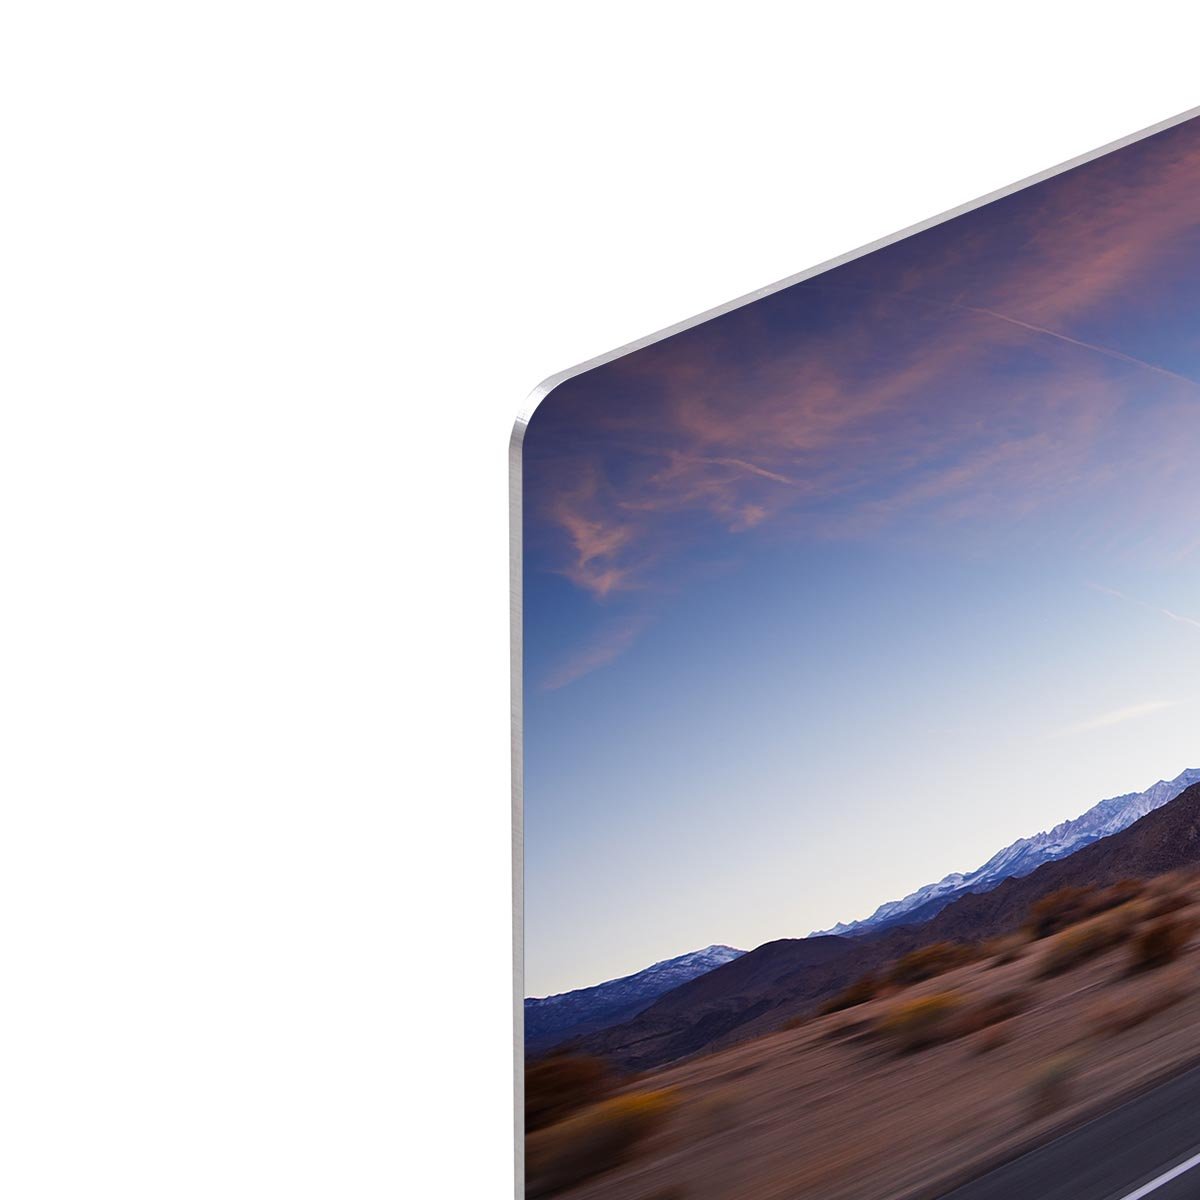 Truck and highway at sunset HD Metal Print